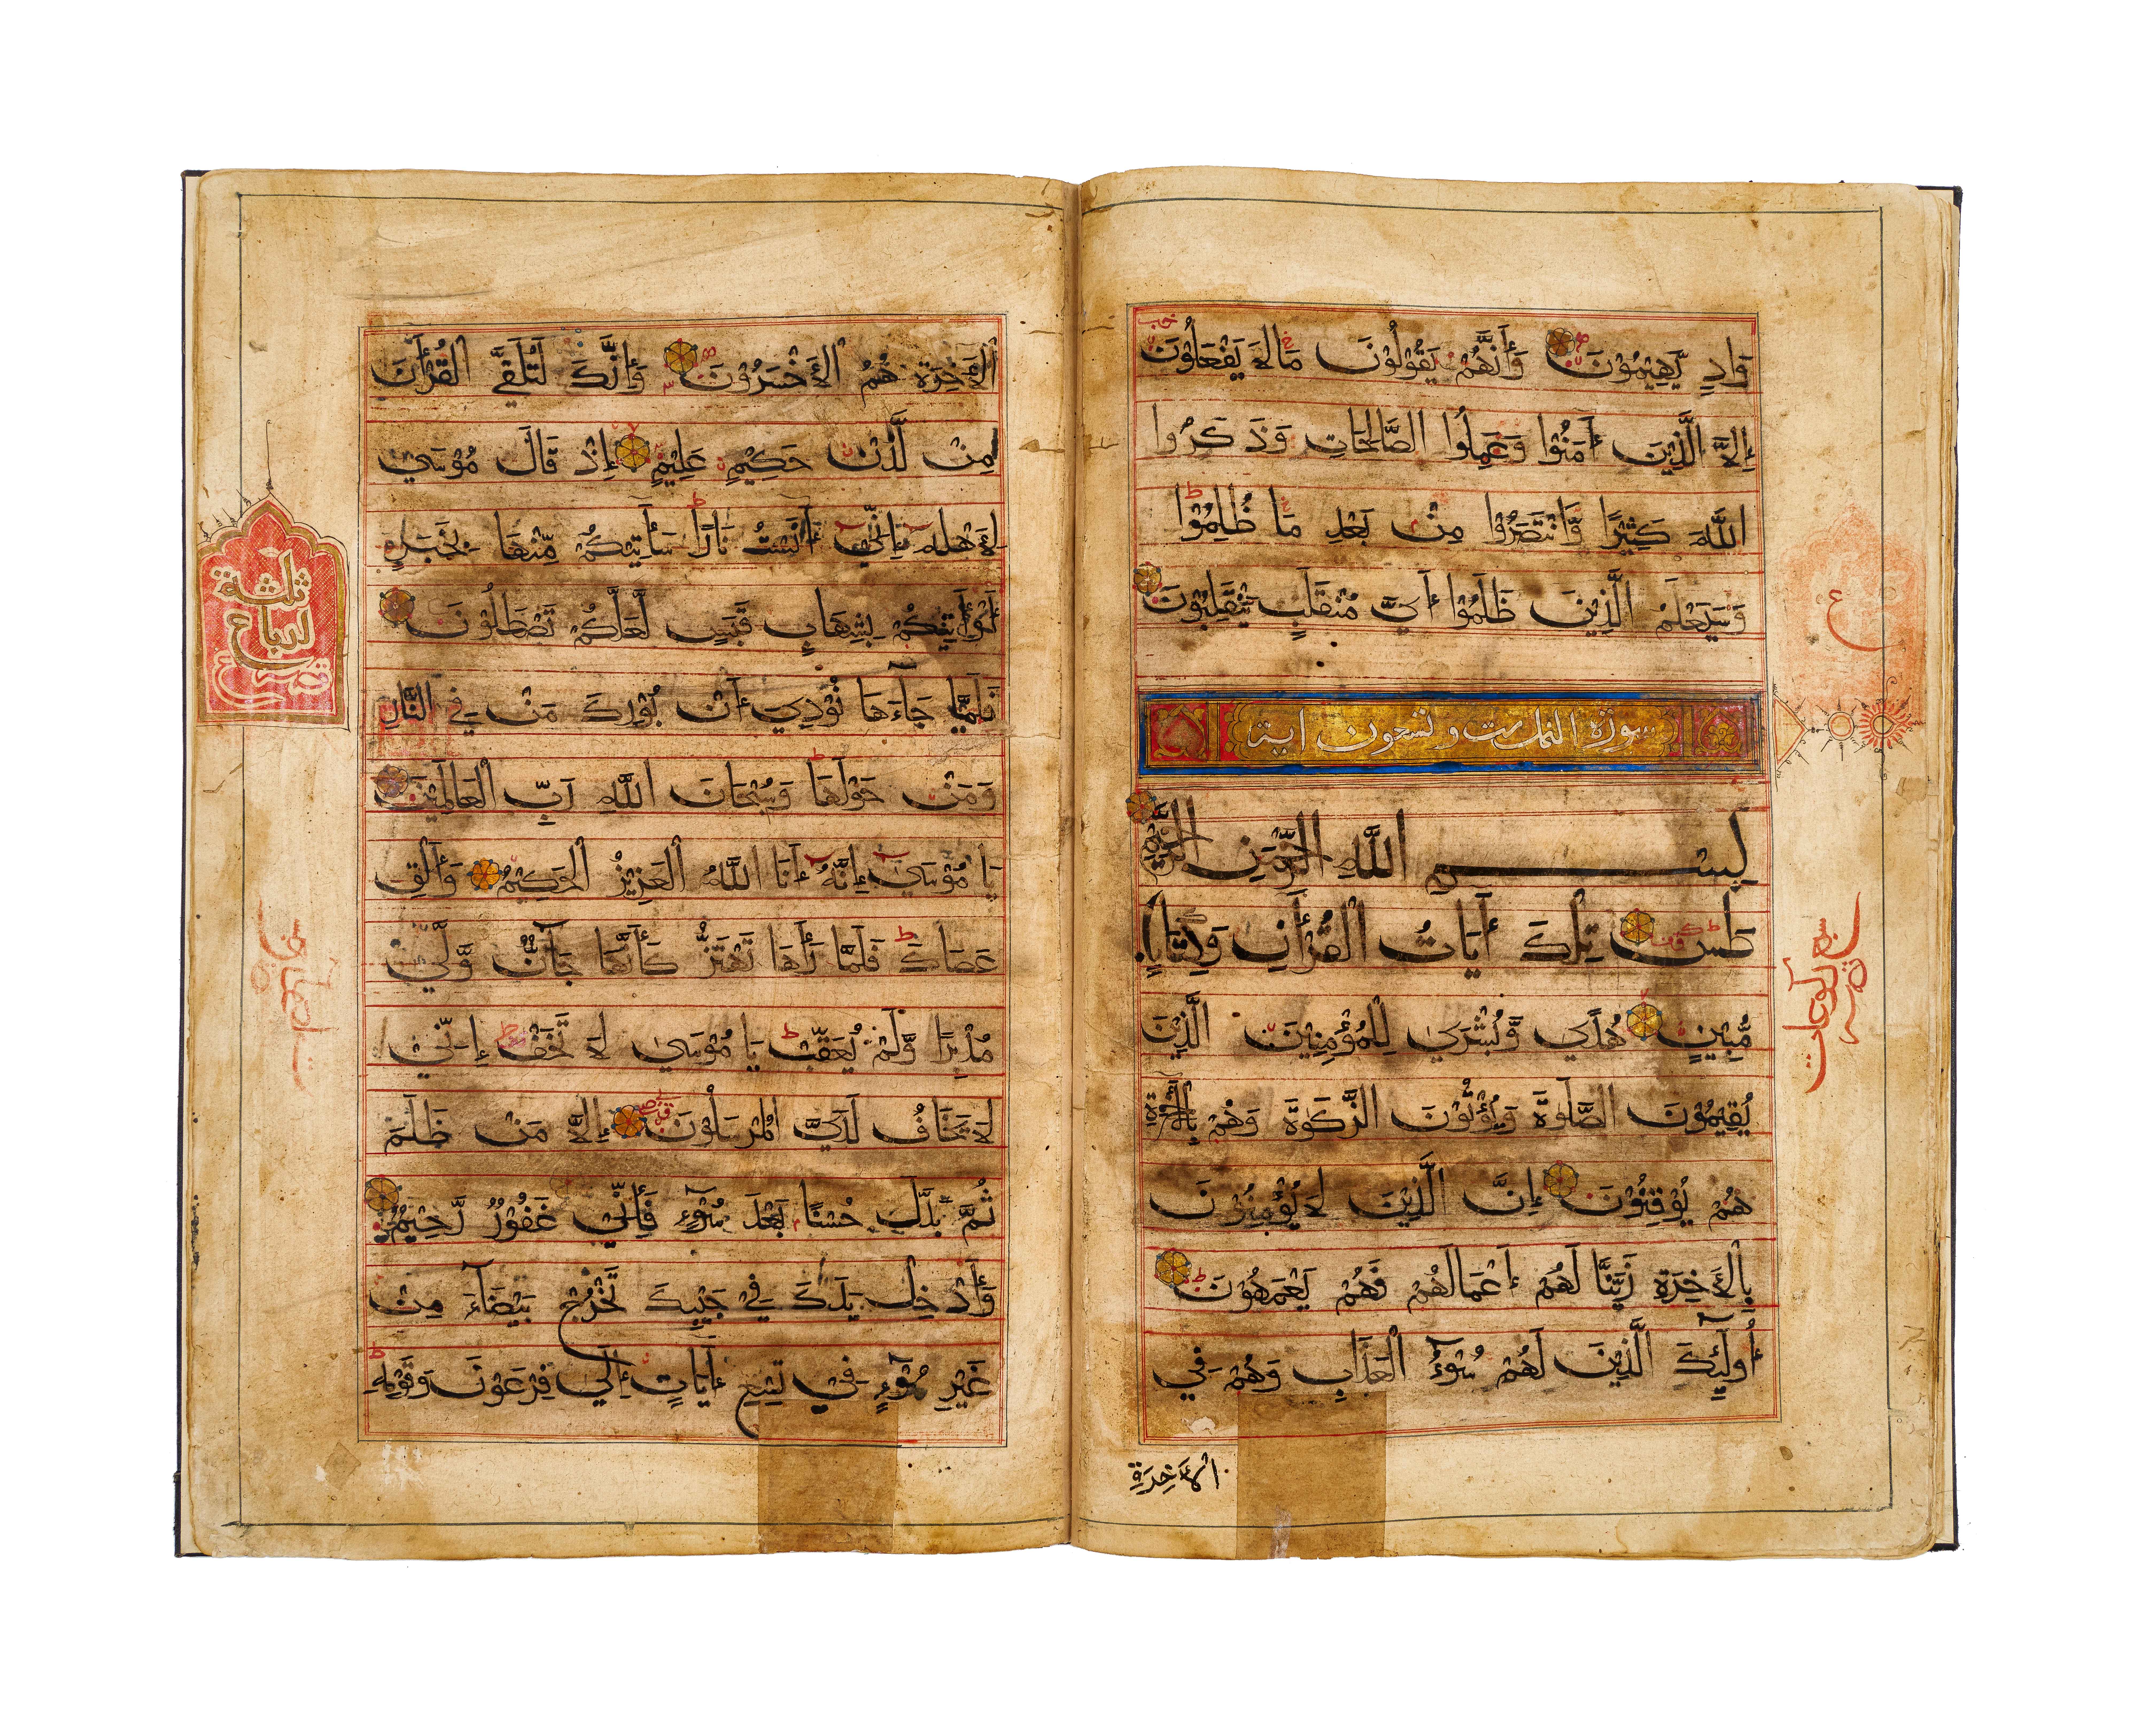 AN ILLUMINATED SECTION FROM A MONUMENTAL BIHARI QUR'AN SULTANATE INDIA, 15TH CENTURY - Image 4 of 7